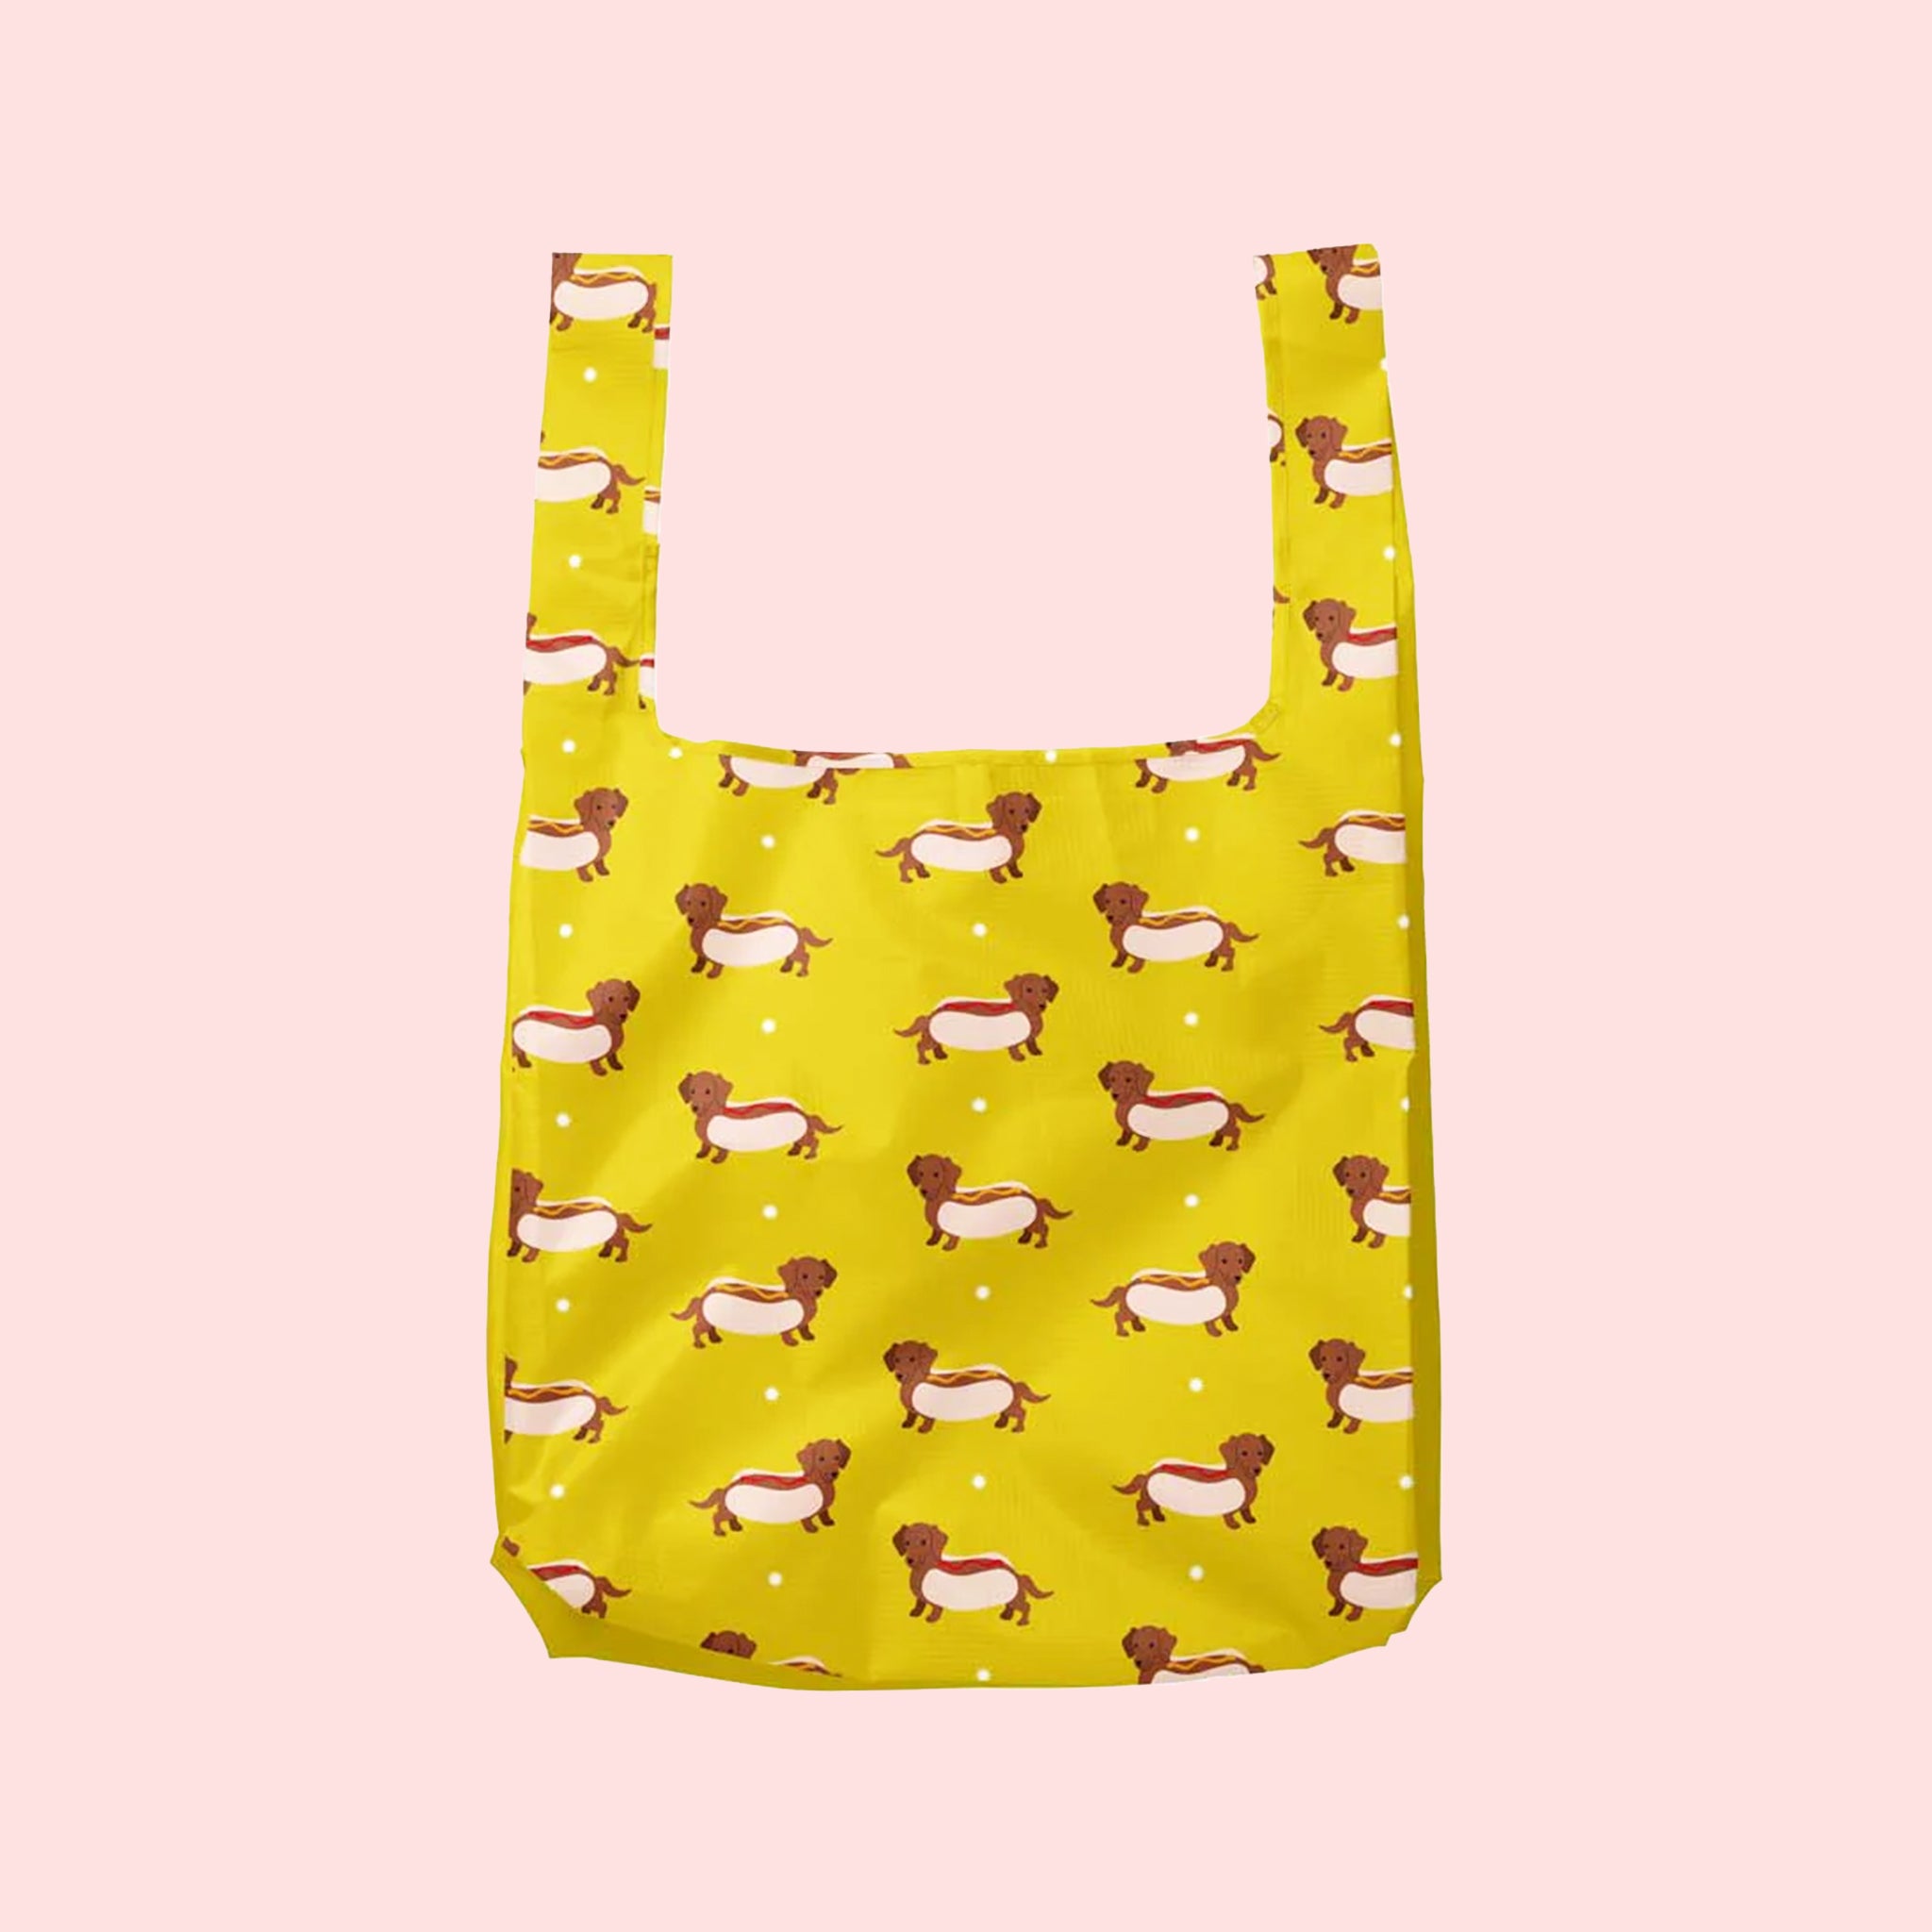 A yellow nylon tote bag with a wiener dog hot dog print.